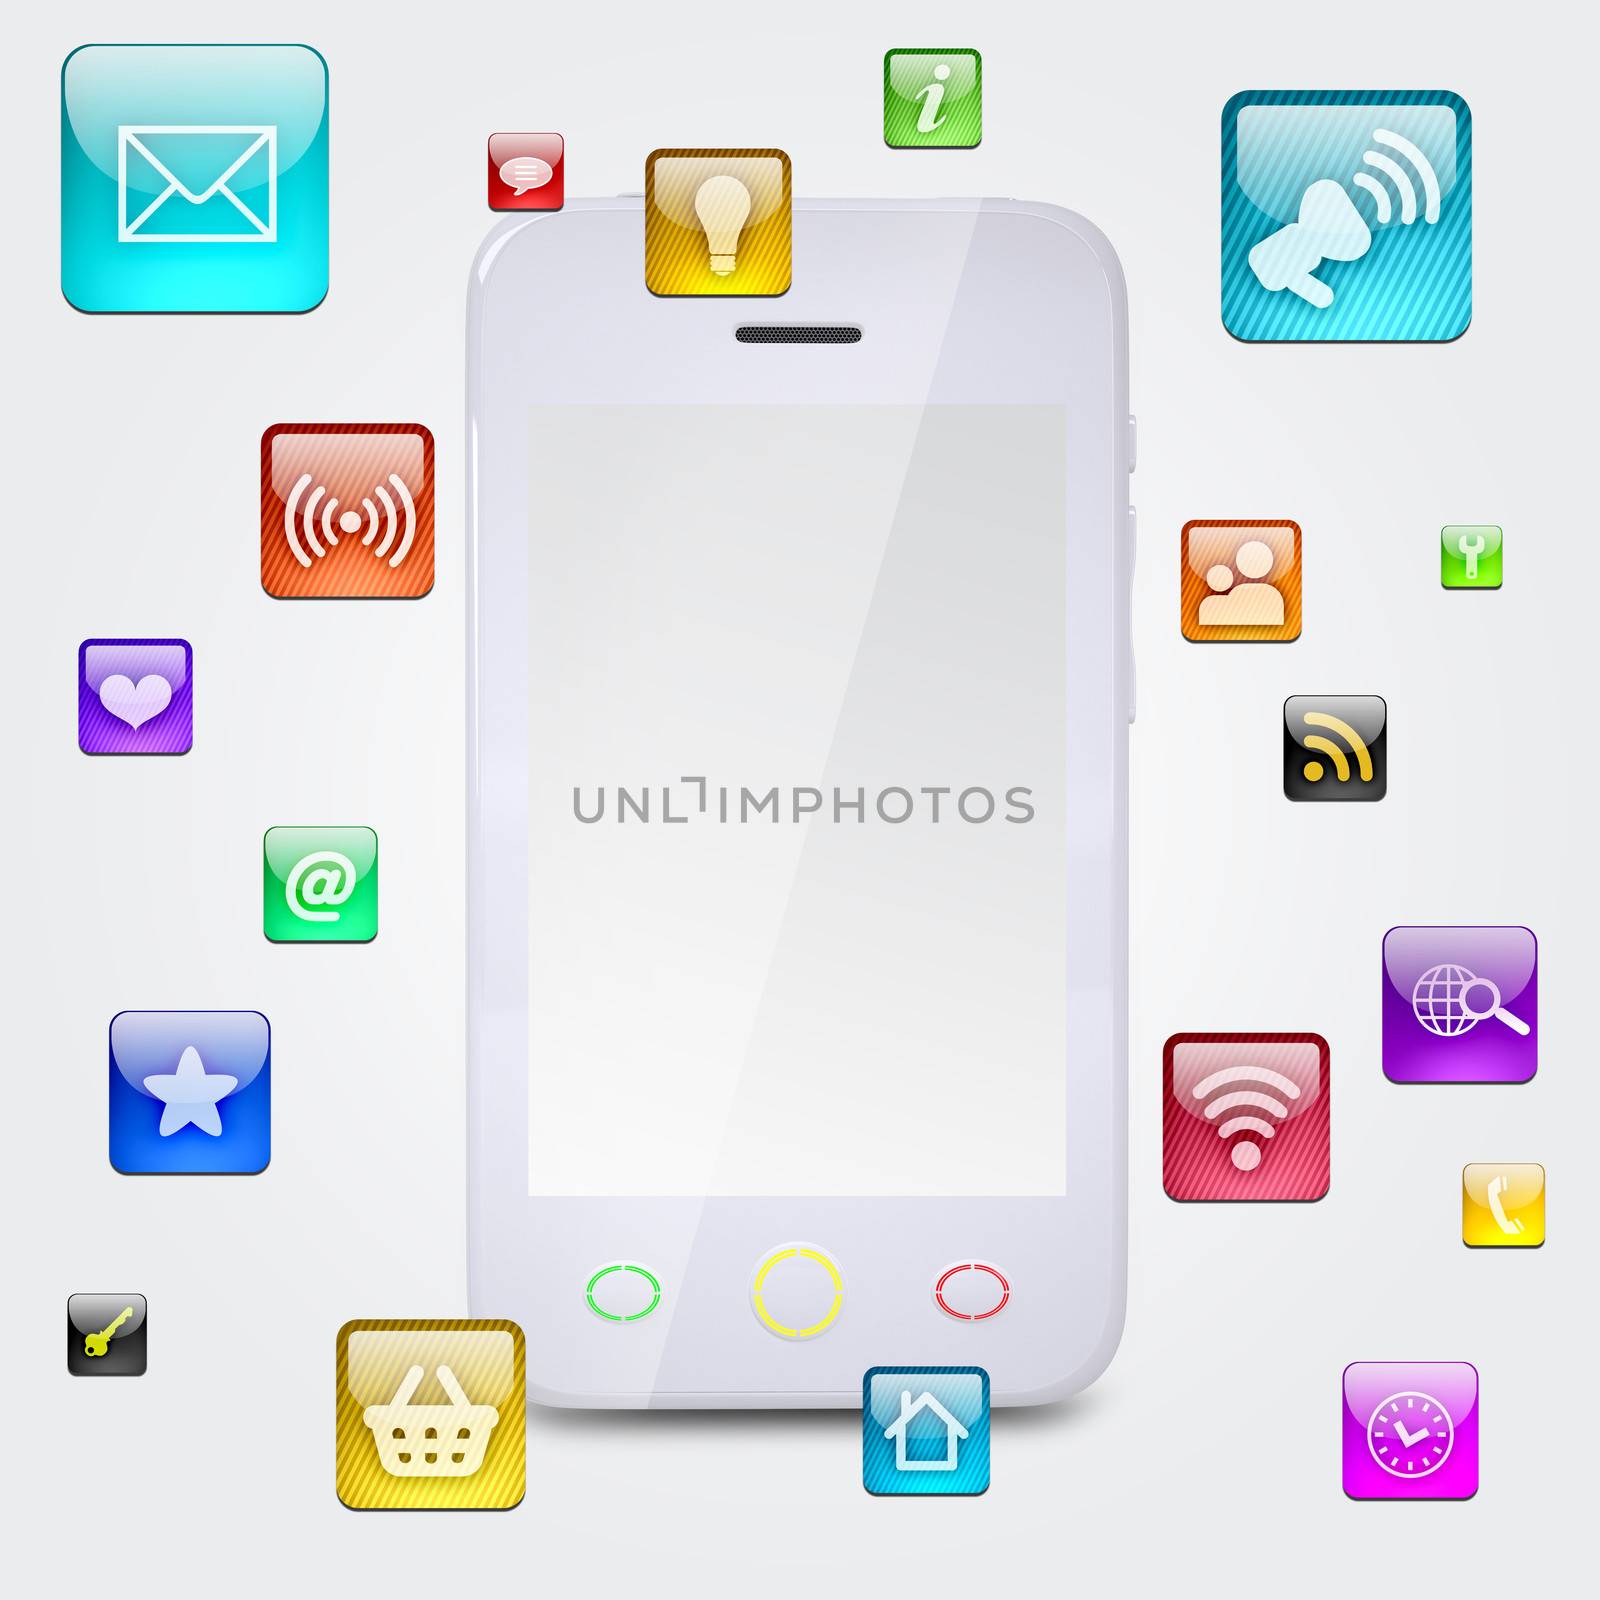 Smartphone and application icons. The concept of software